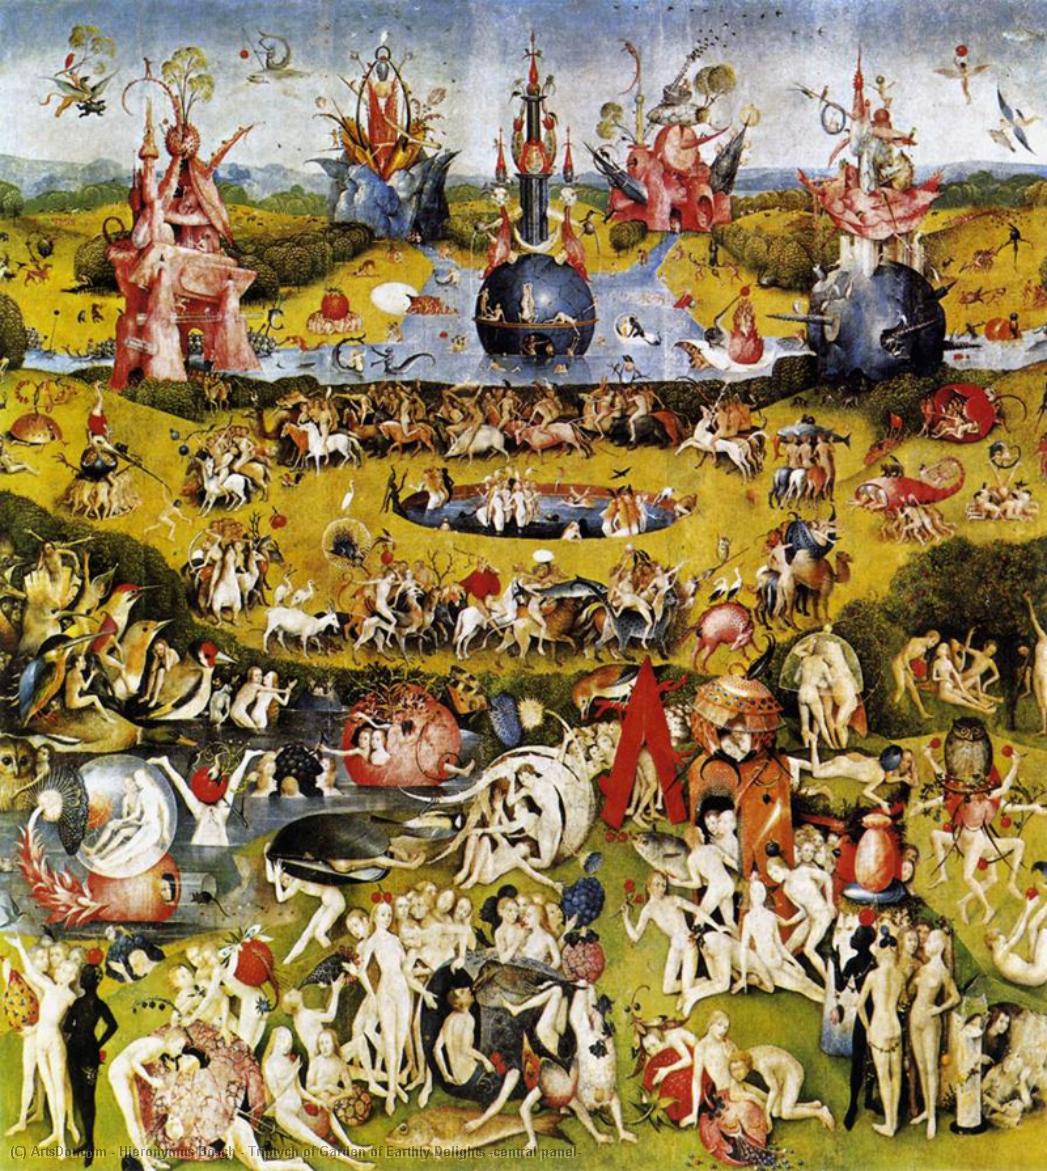 WikiOO.org - Encyclopedia of Fine Arts - Lukisan, Artwork Hieronymus Bosch - Triptych of Garden of Earthly Delights (central panel)